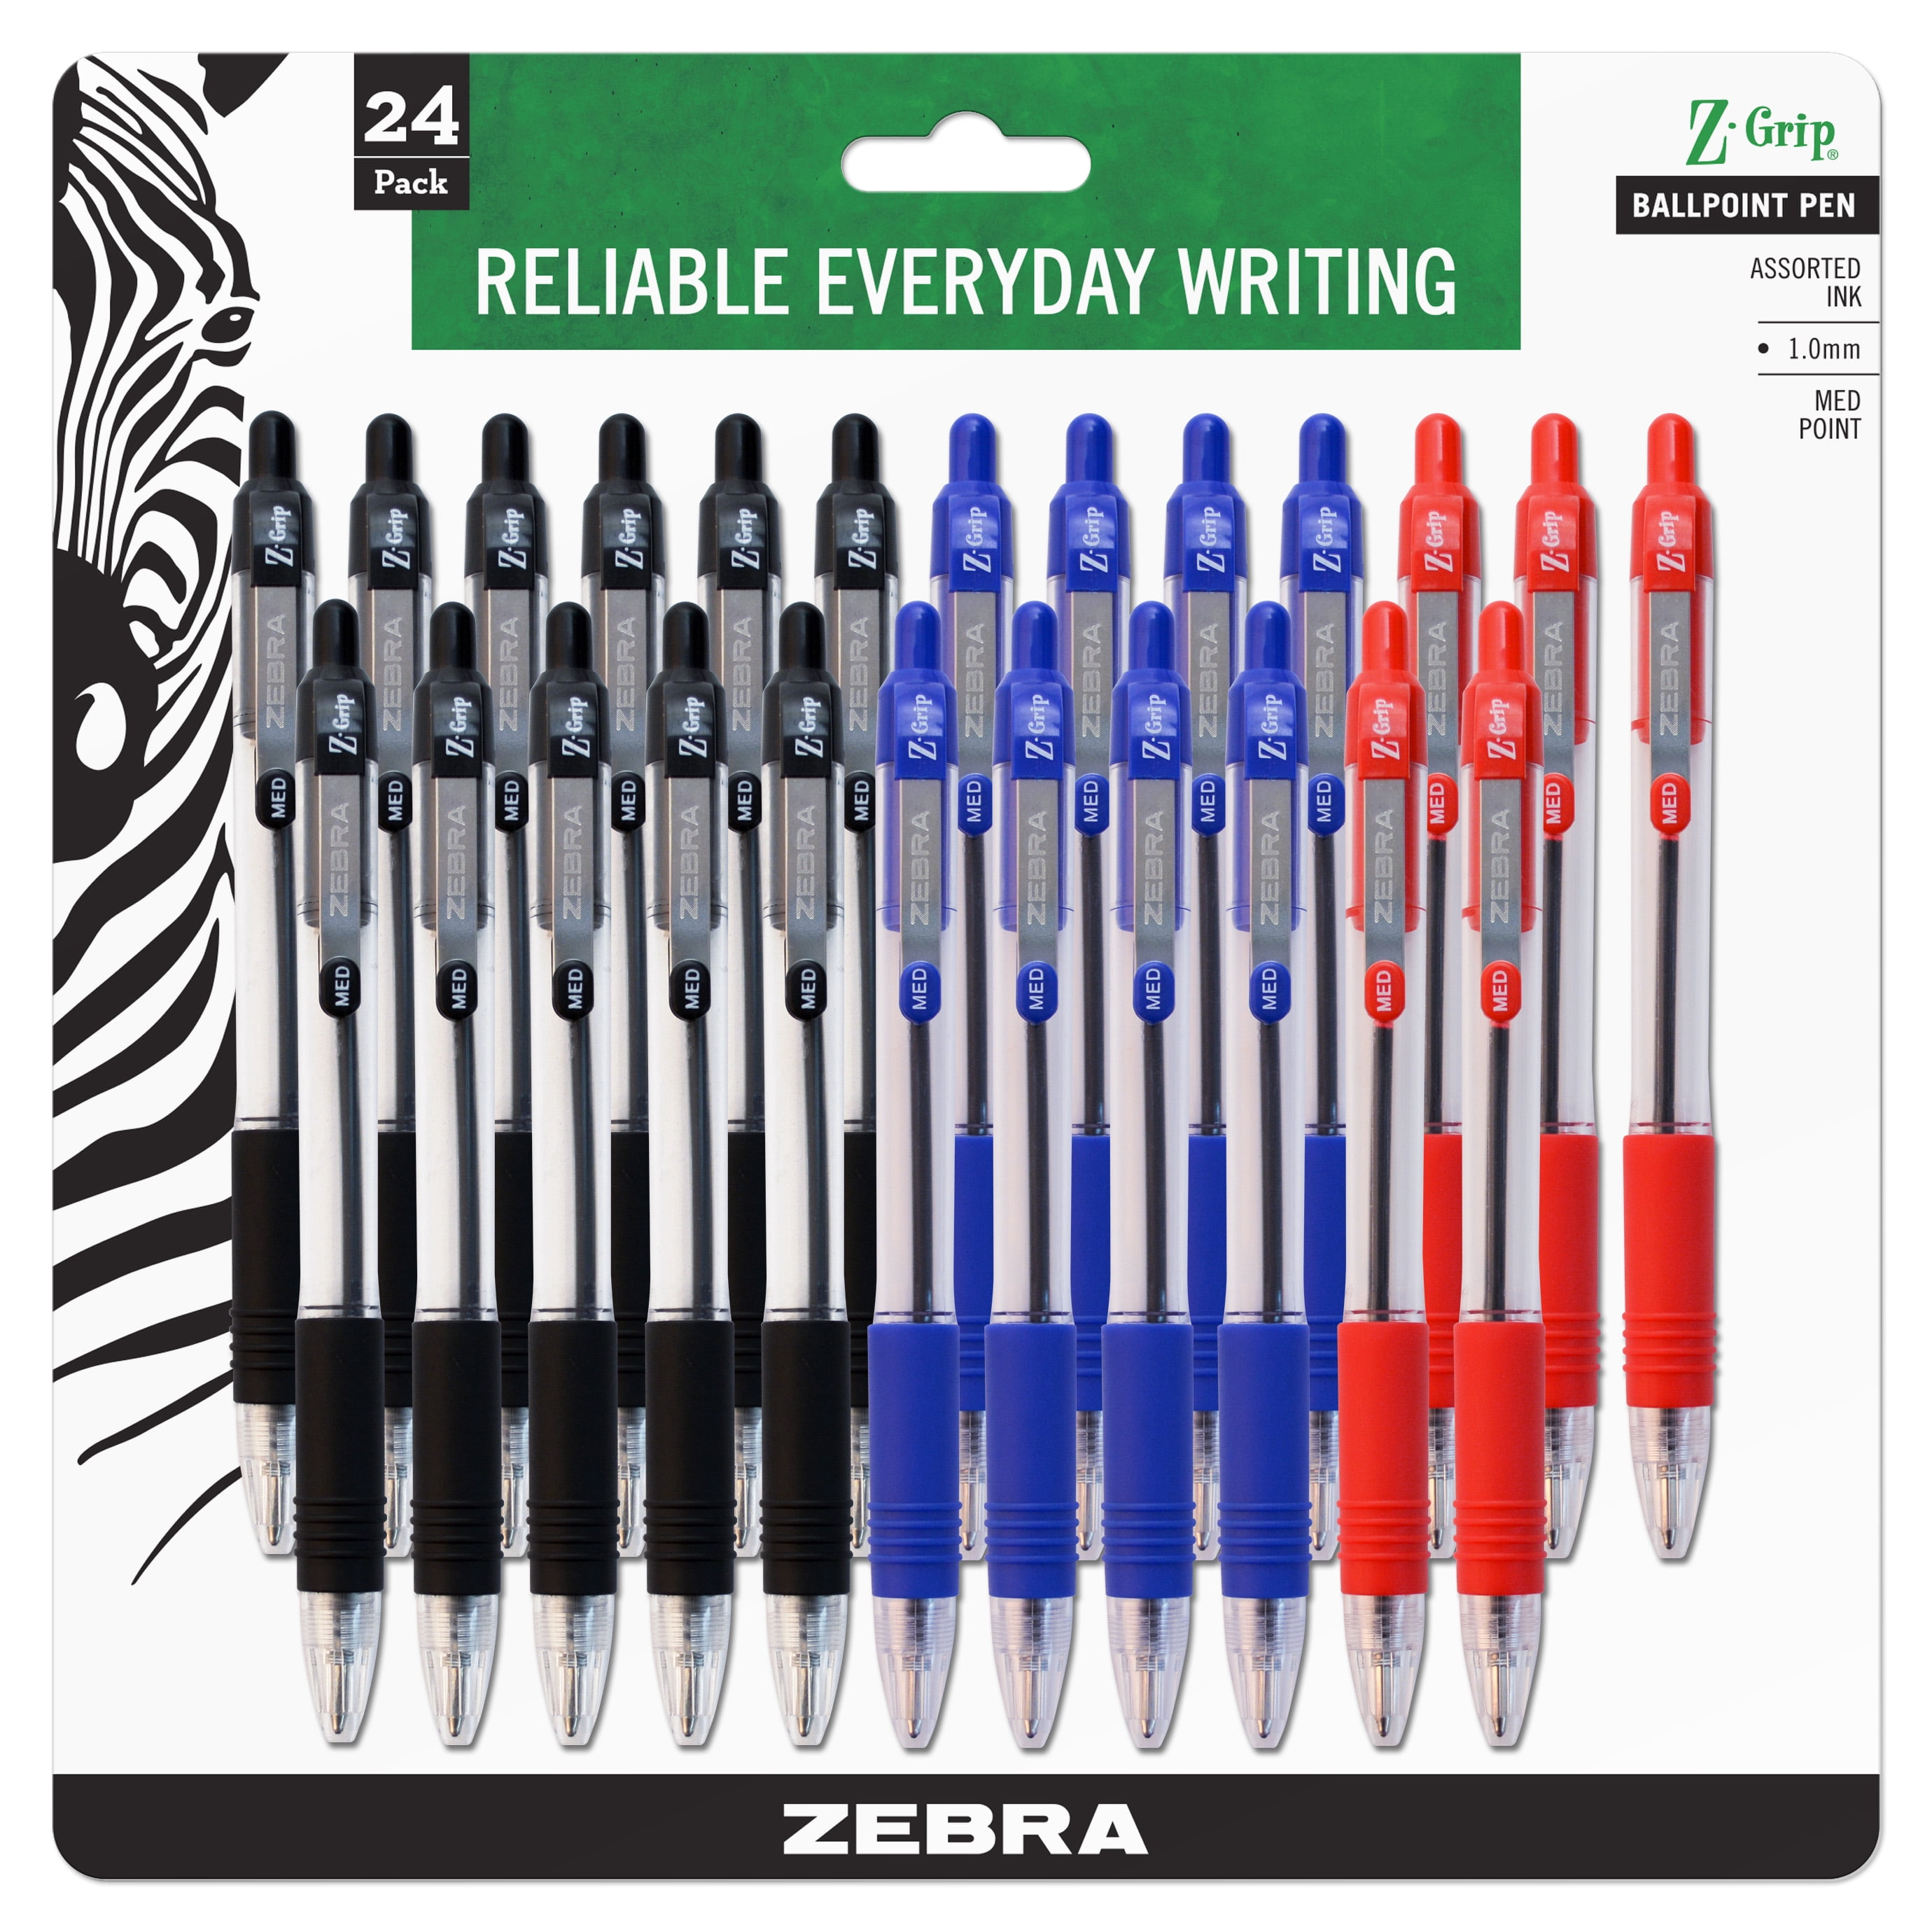 Bic 4 Colours Rose Gold Pen, Multi Coloured Pens All In One, Retractable  Ballpoint Pen, Medium 1.0mm, Green, Blue, Red, Black, 5 Pens Per Pack, 1  Pack